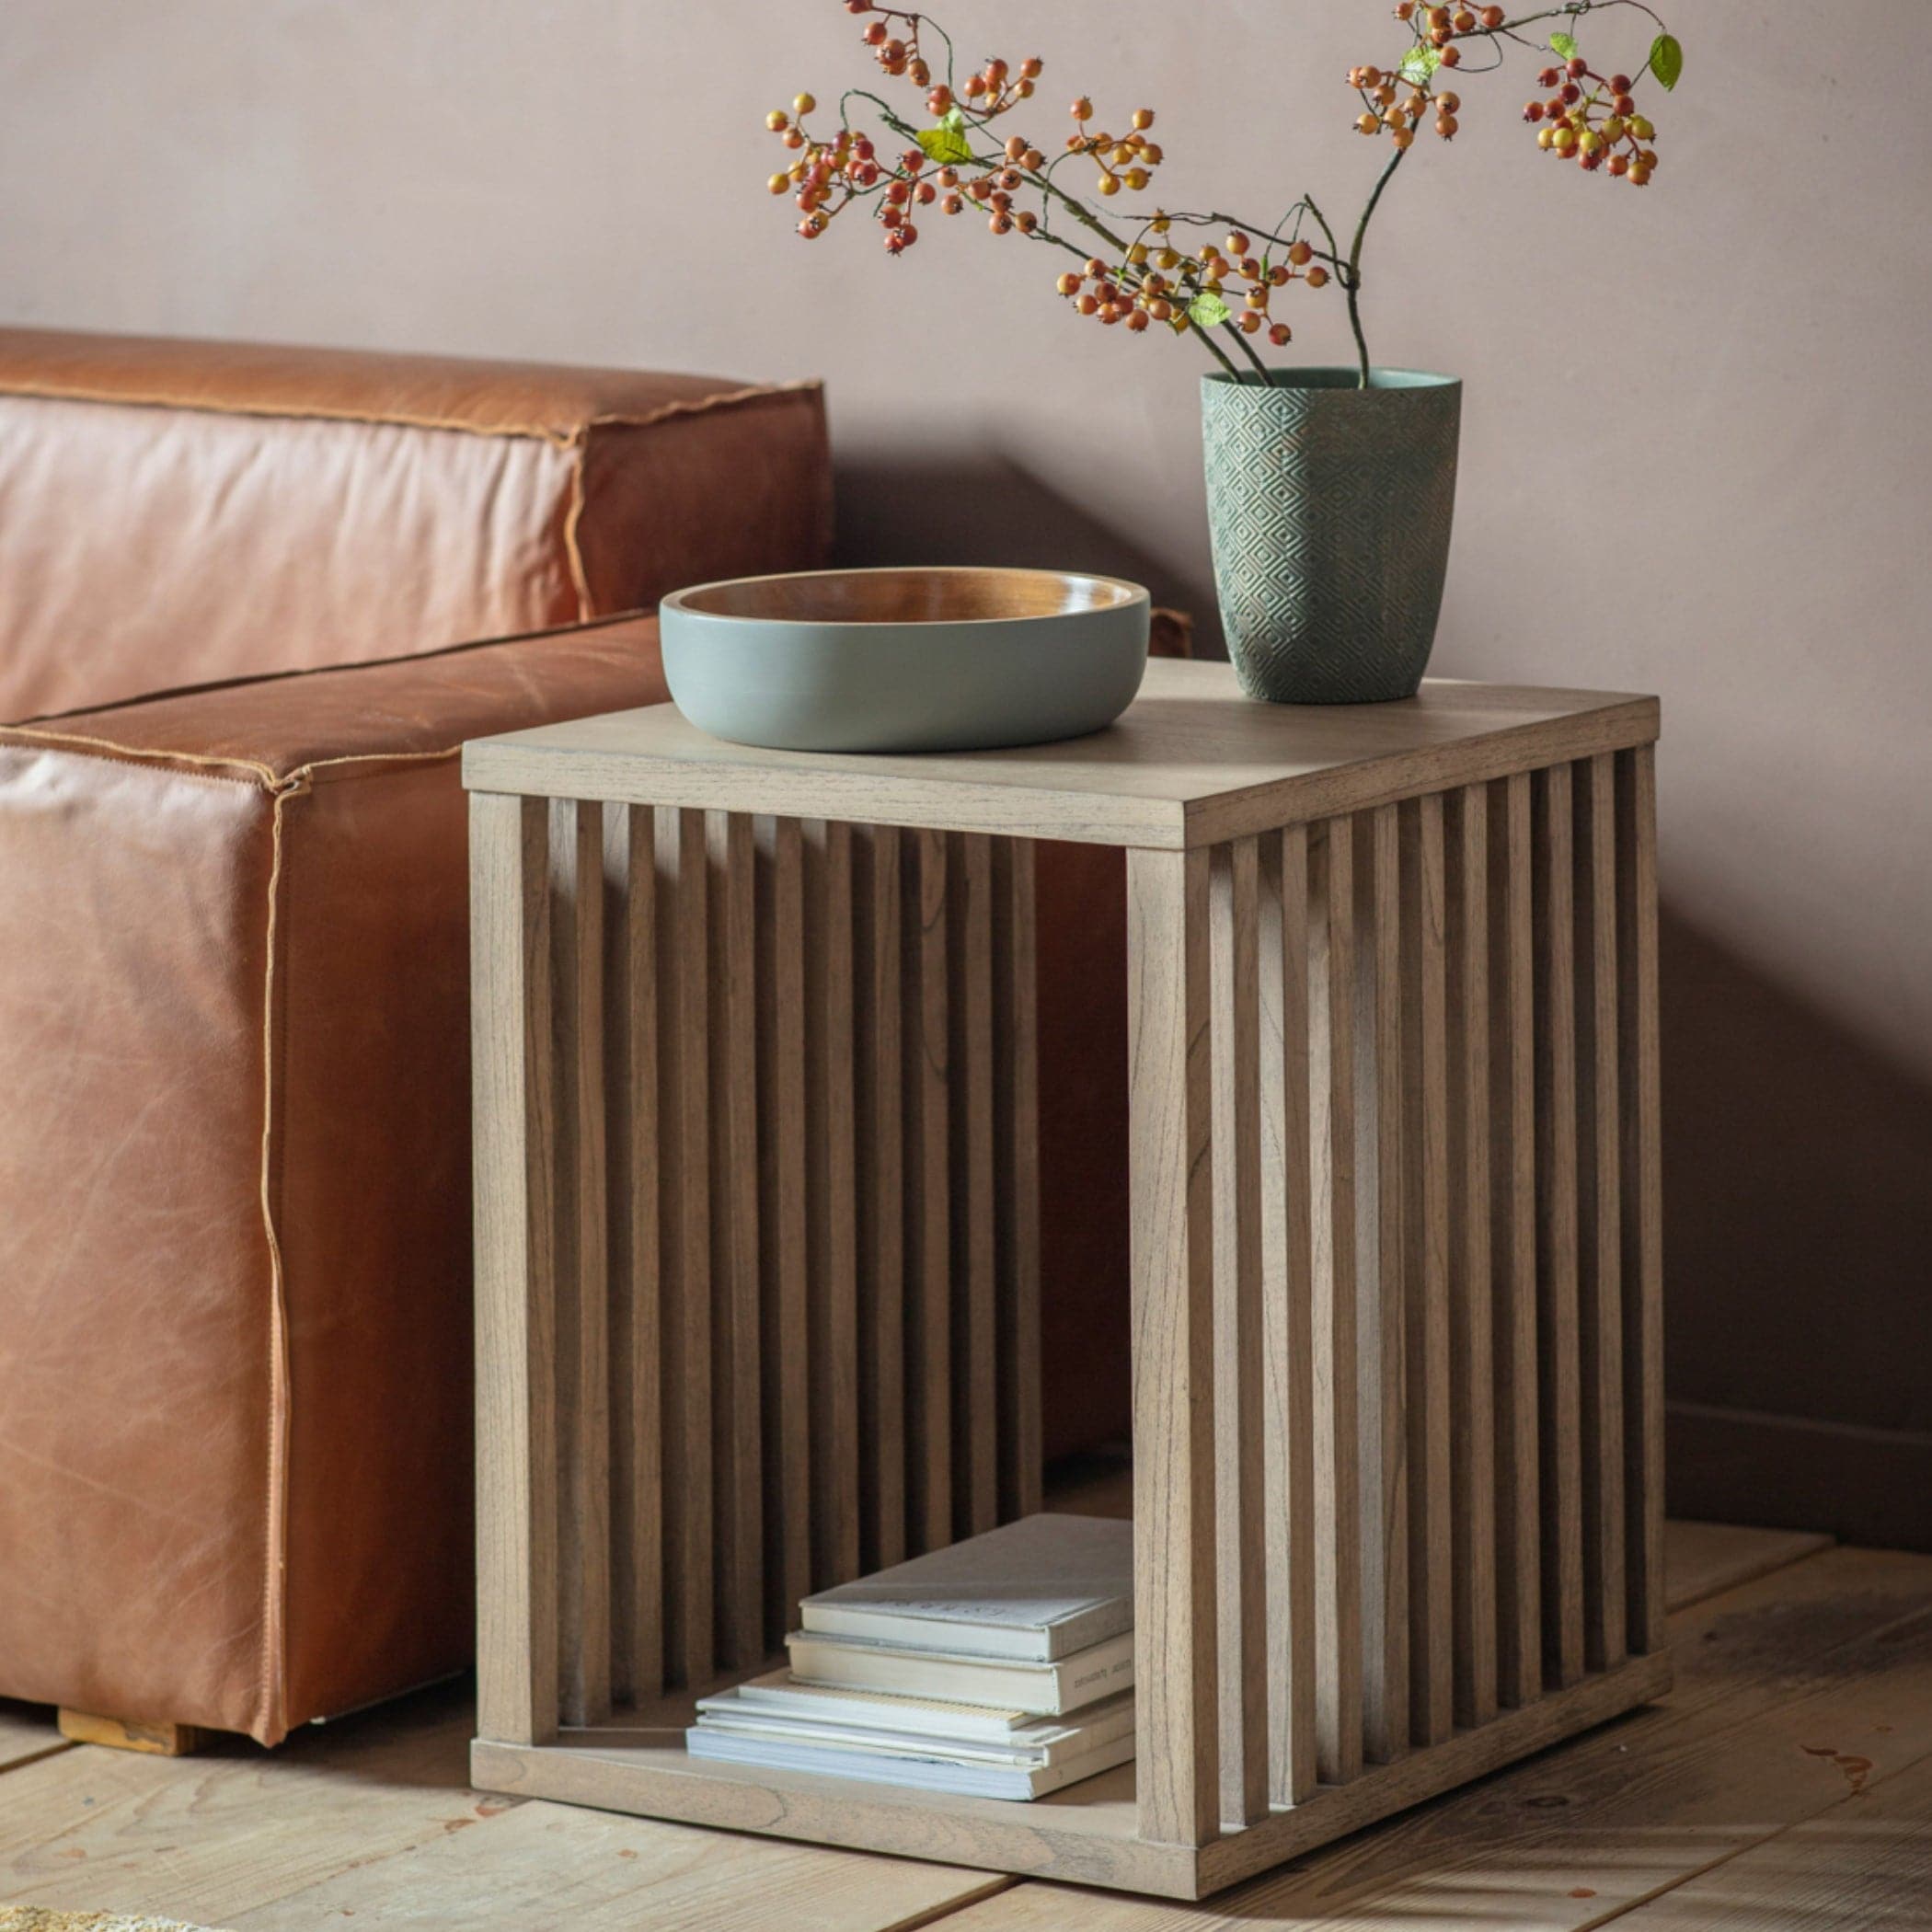 Slatted Sided Ash Side Table - The Farthing